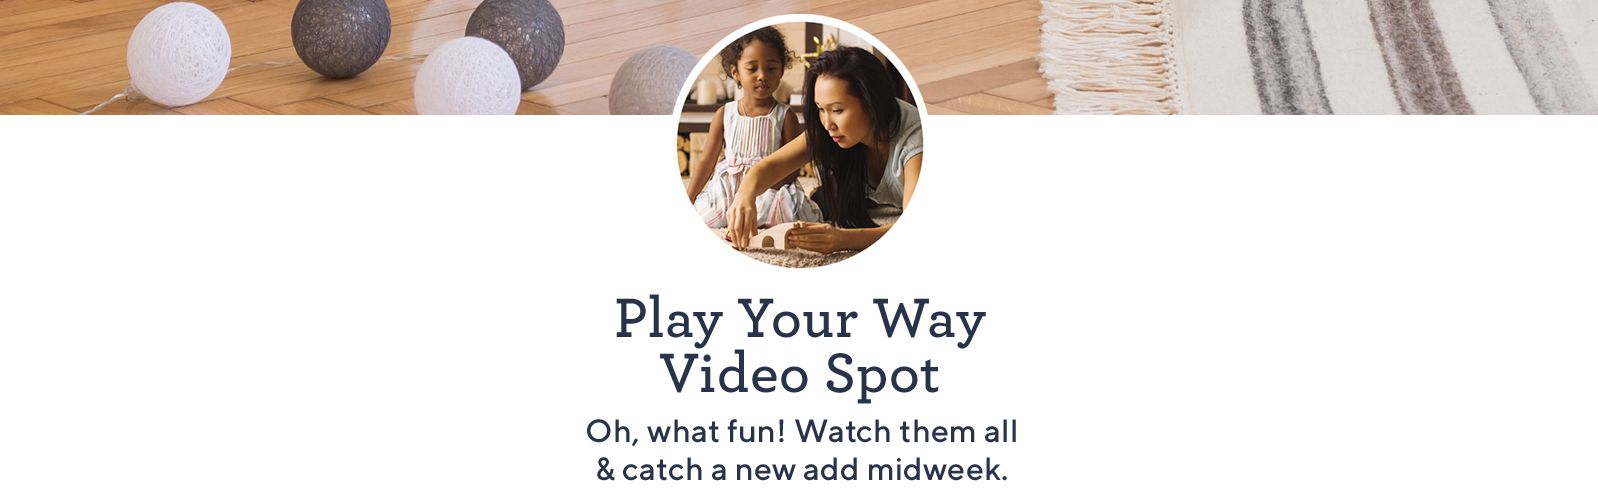 Play Your Way Video Spot. Oh, what fun! Watch them all & catch a new add midweek.